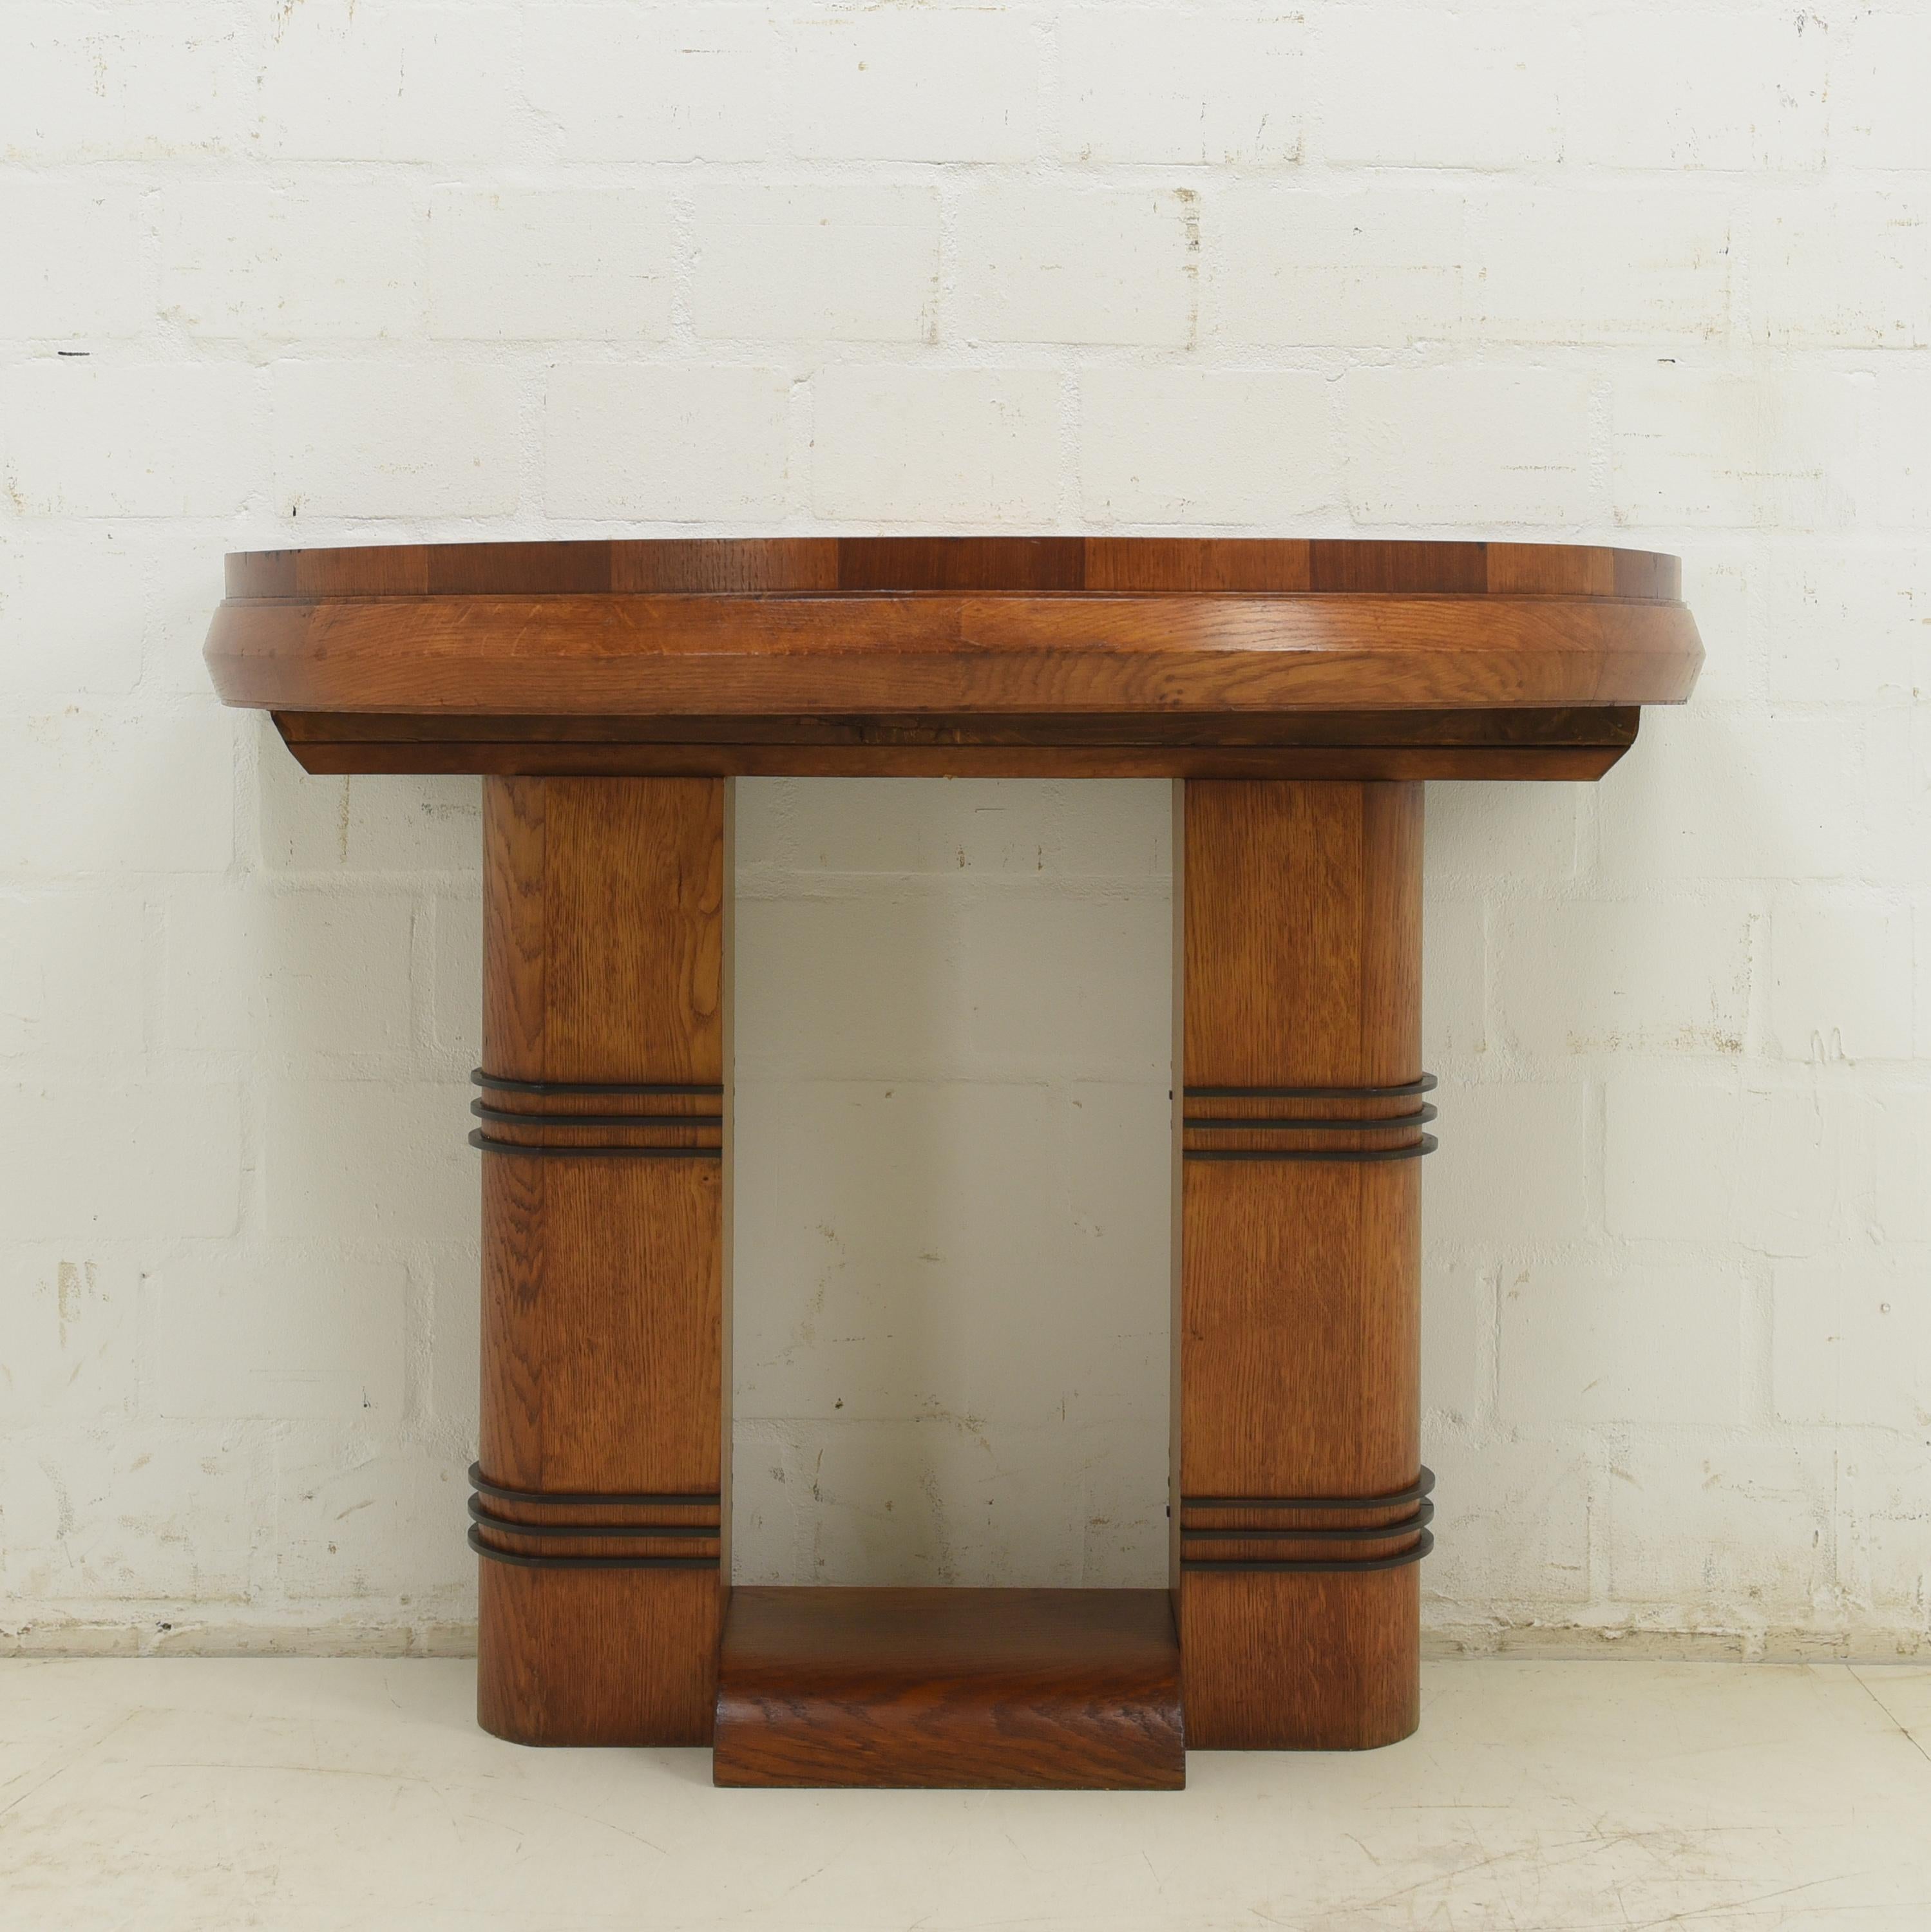 Console table restored Art Deco around 1930 wall table oak mahogany 1/2

Features:
Solid oak and mahogany
High quality
Radiating plate
Cool art deco design
Rare model
In another listing we offer an identical table

Additional